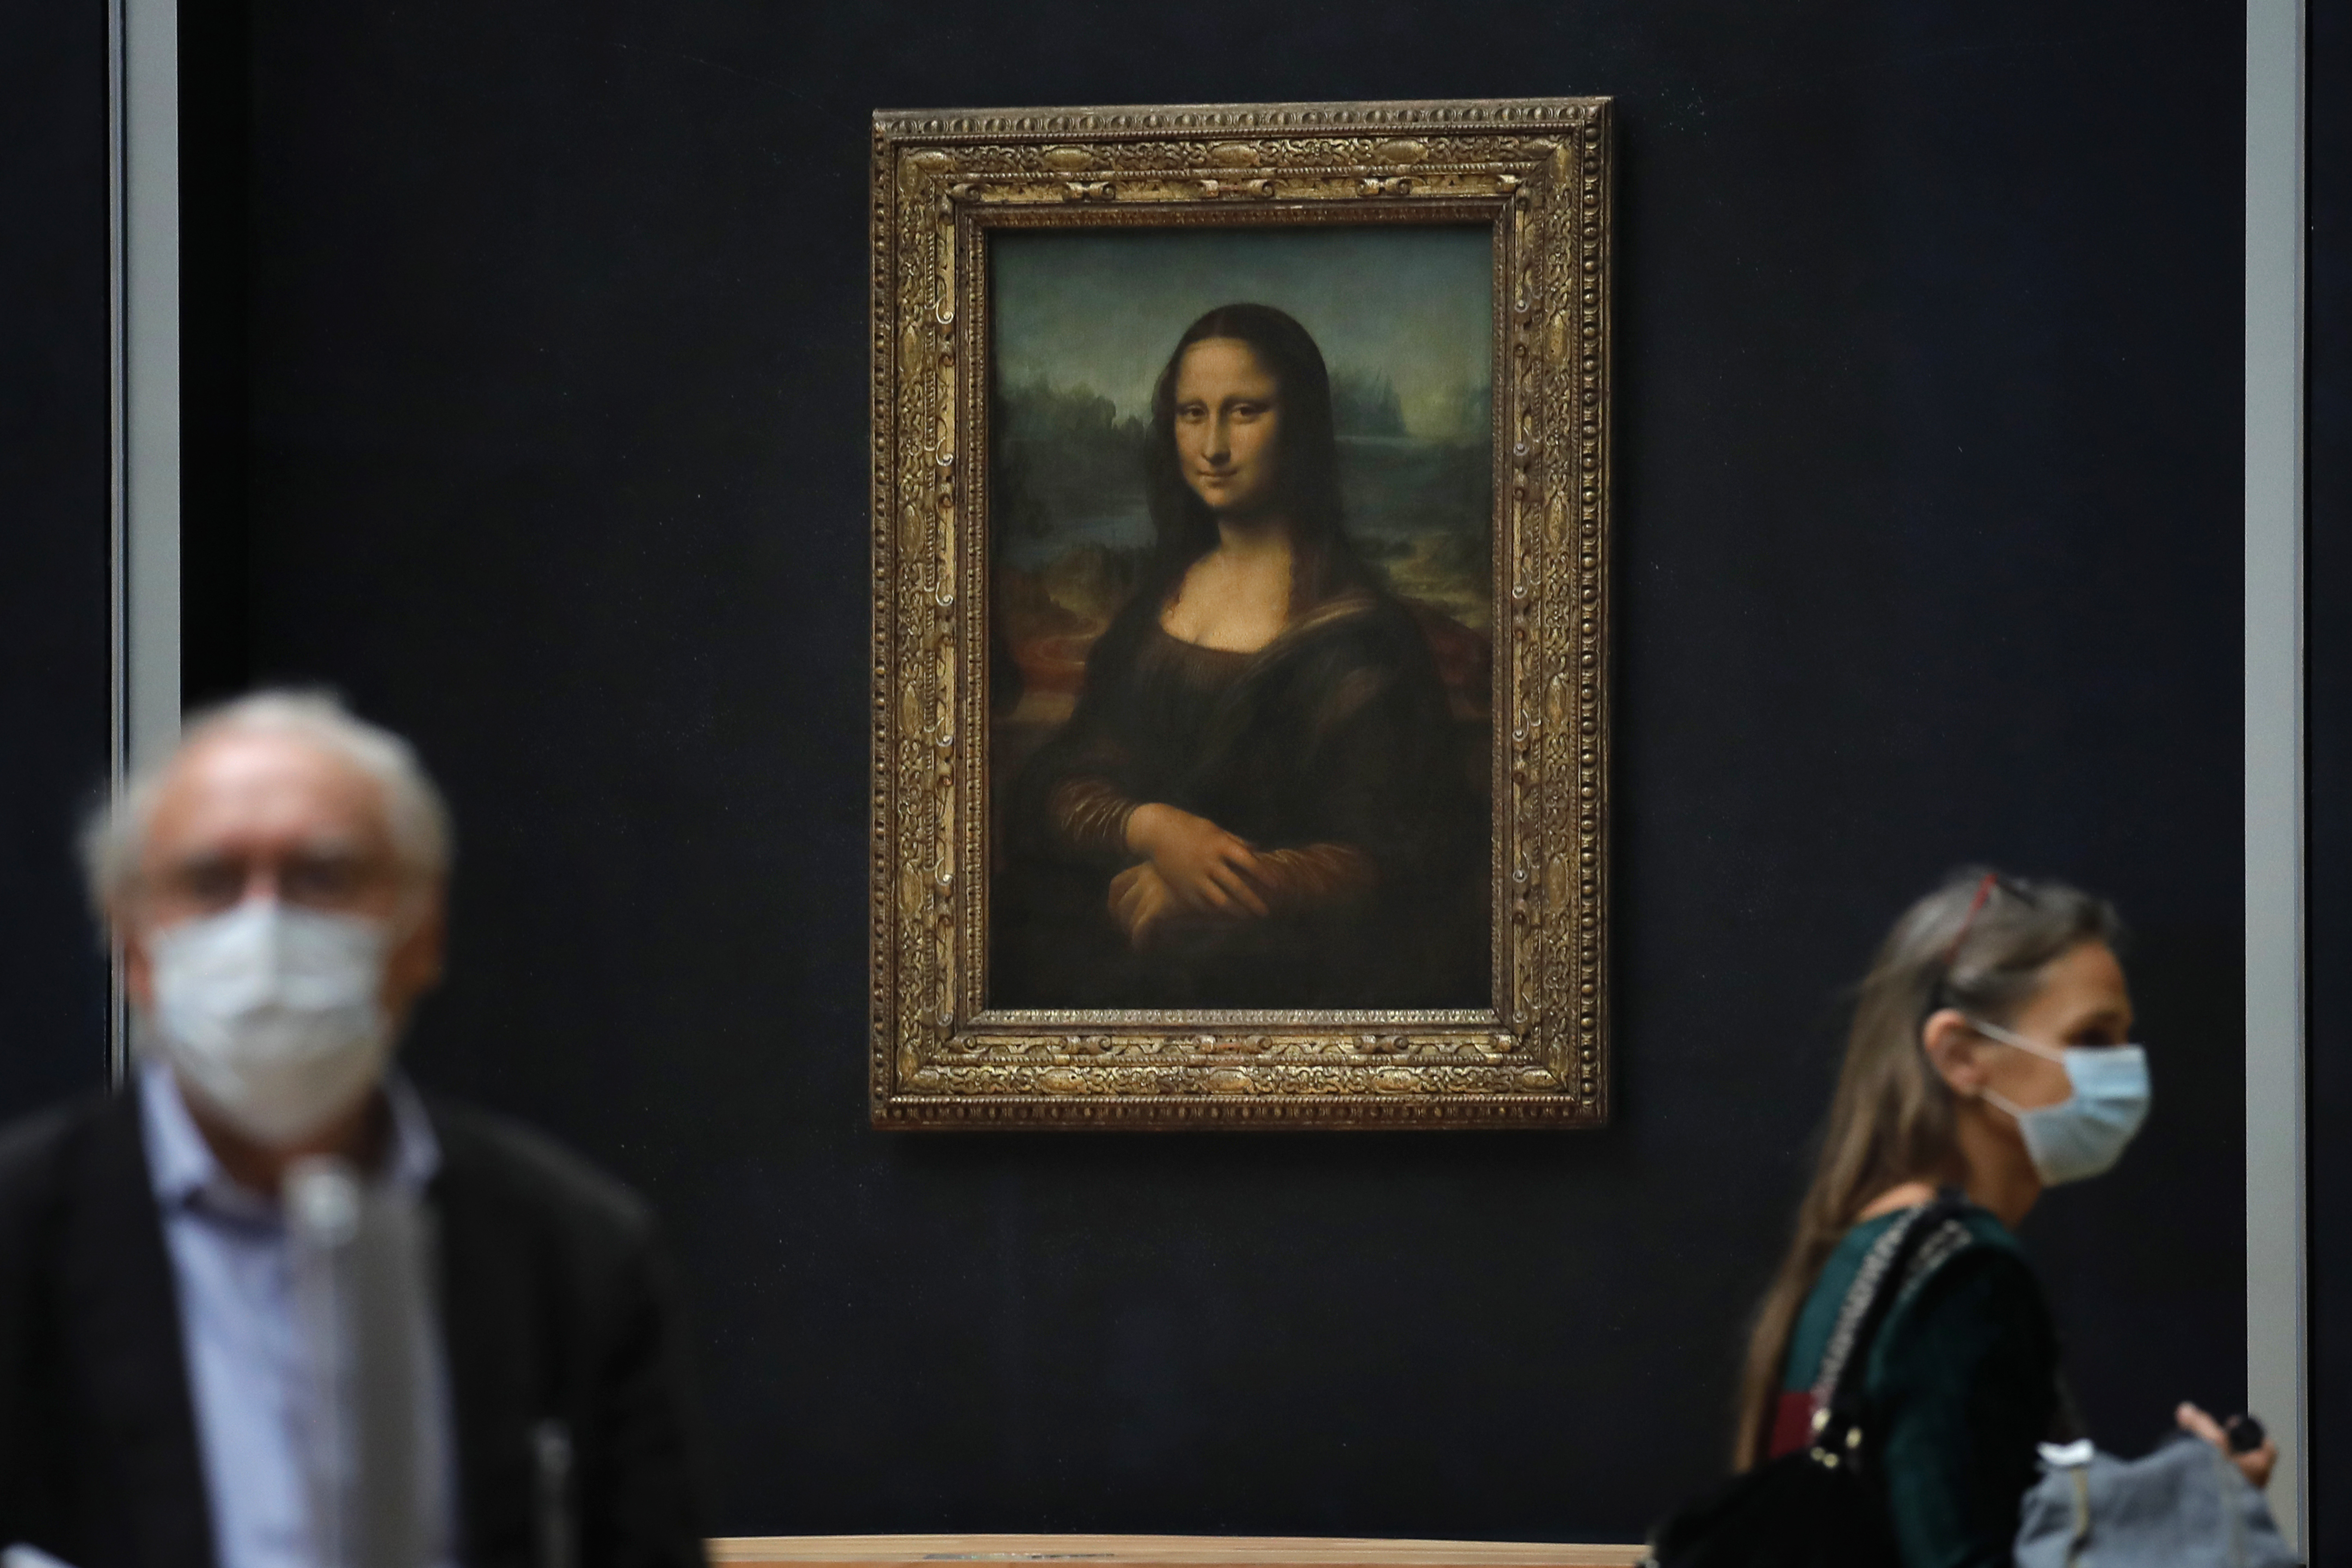 What Can Light Tell Us About the Mona Lisa?